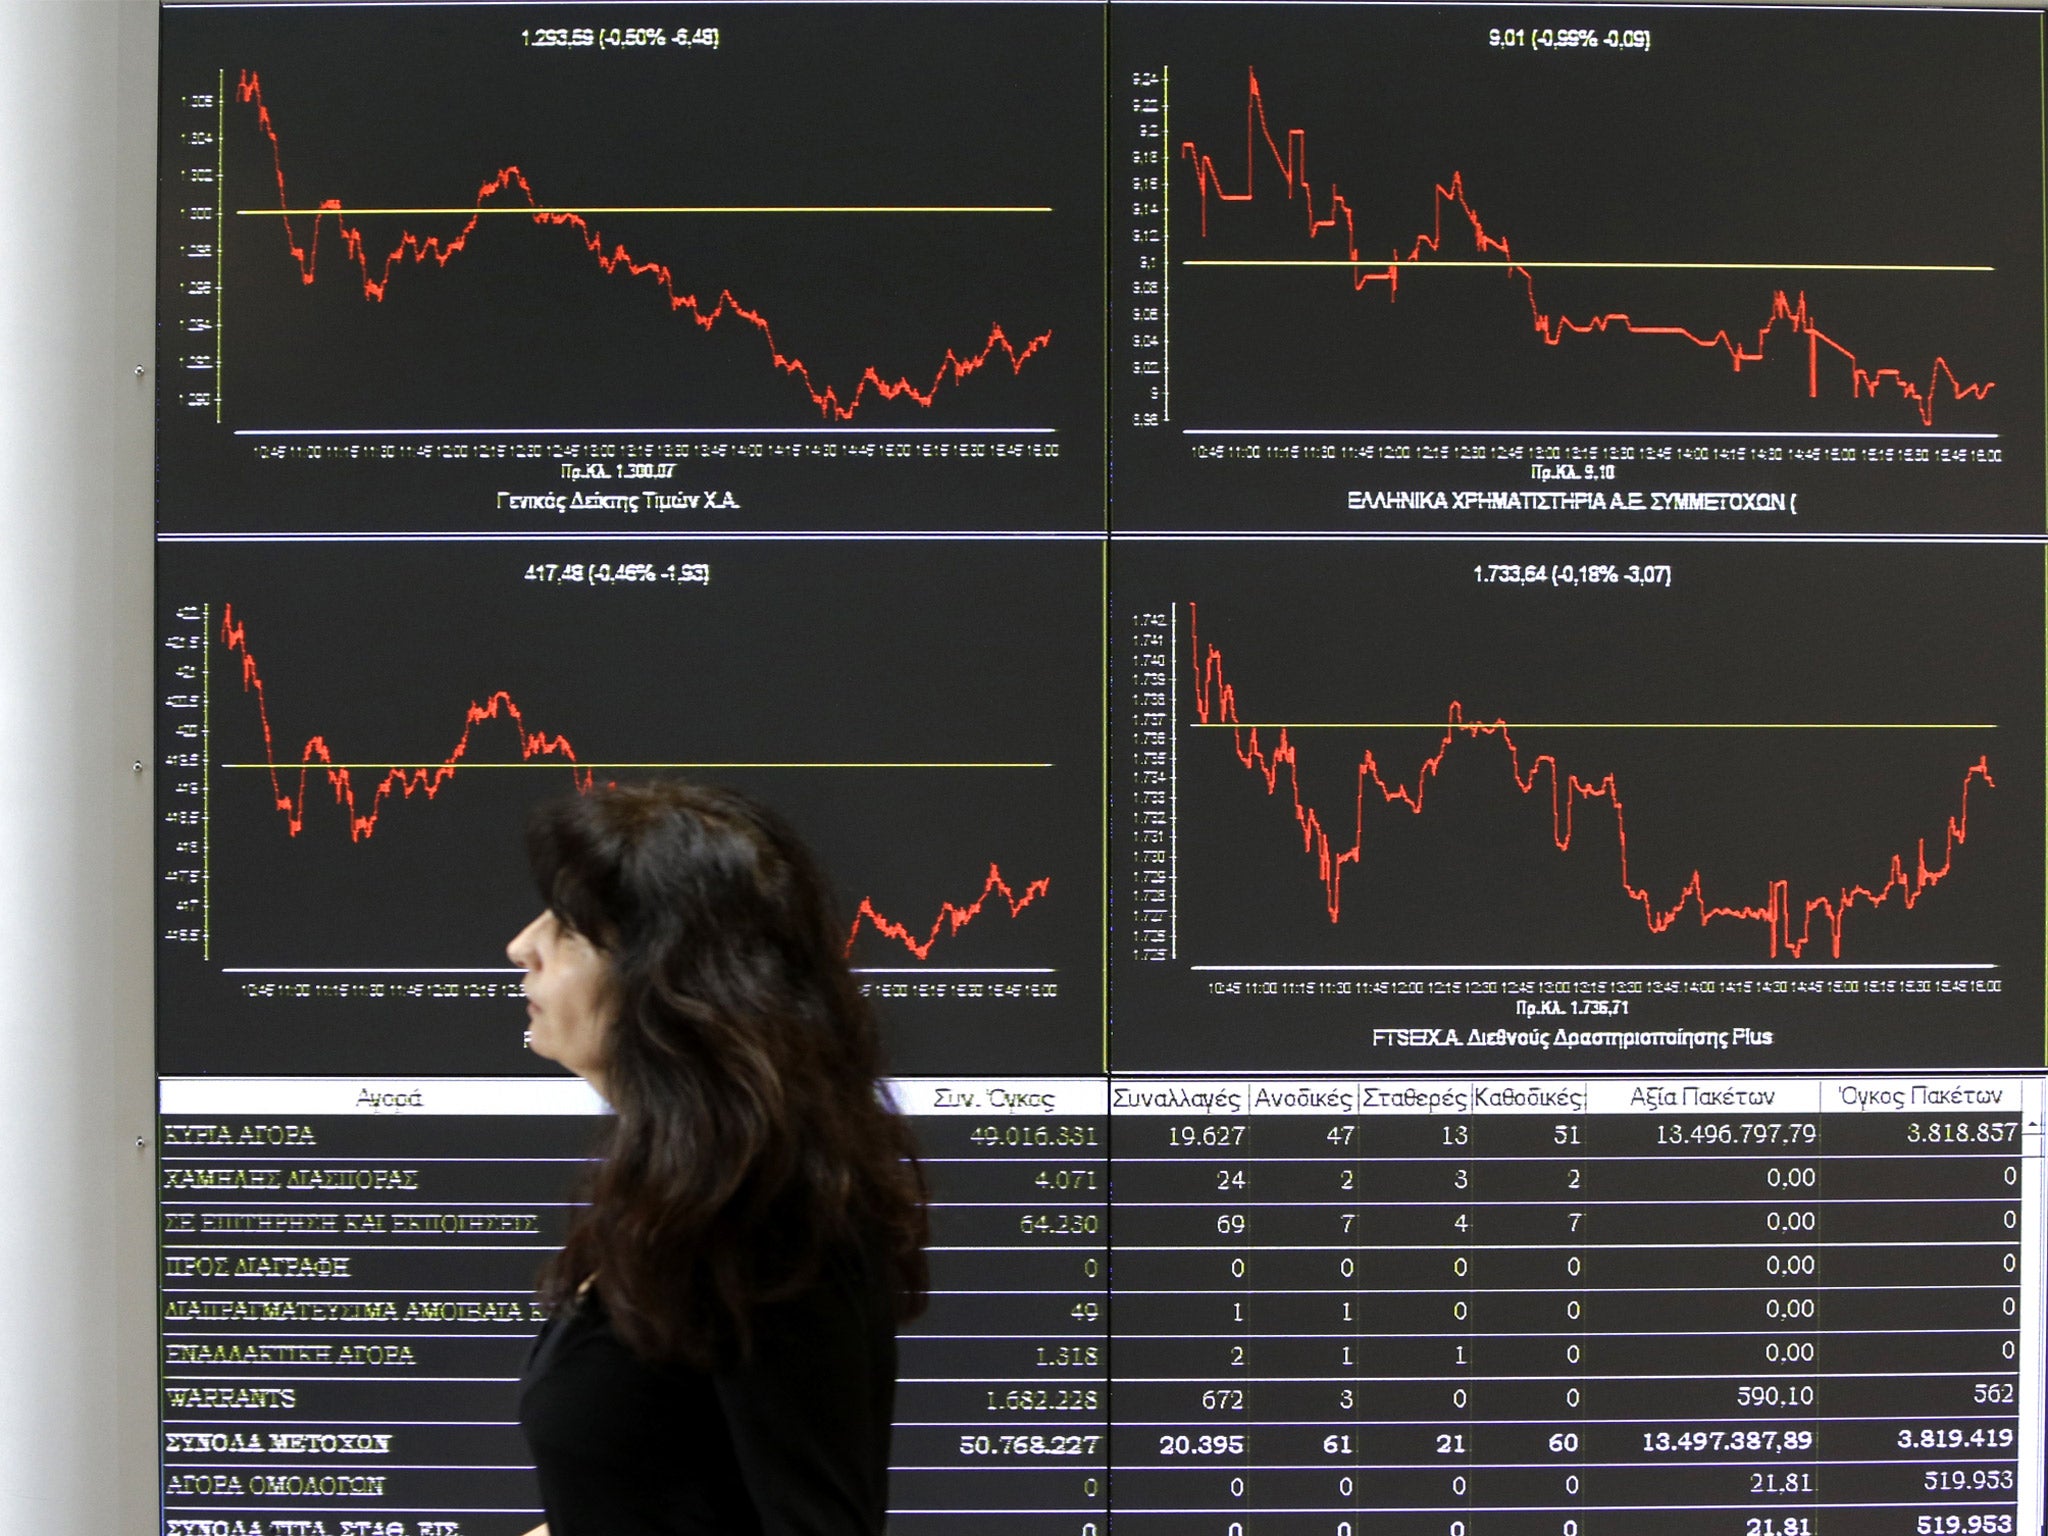 An employee of the Stock Exchange passes a display showing stock price movements in Athens